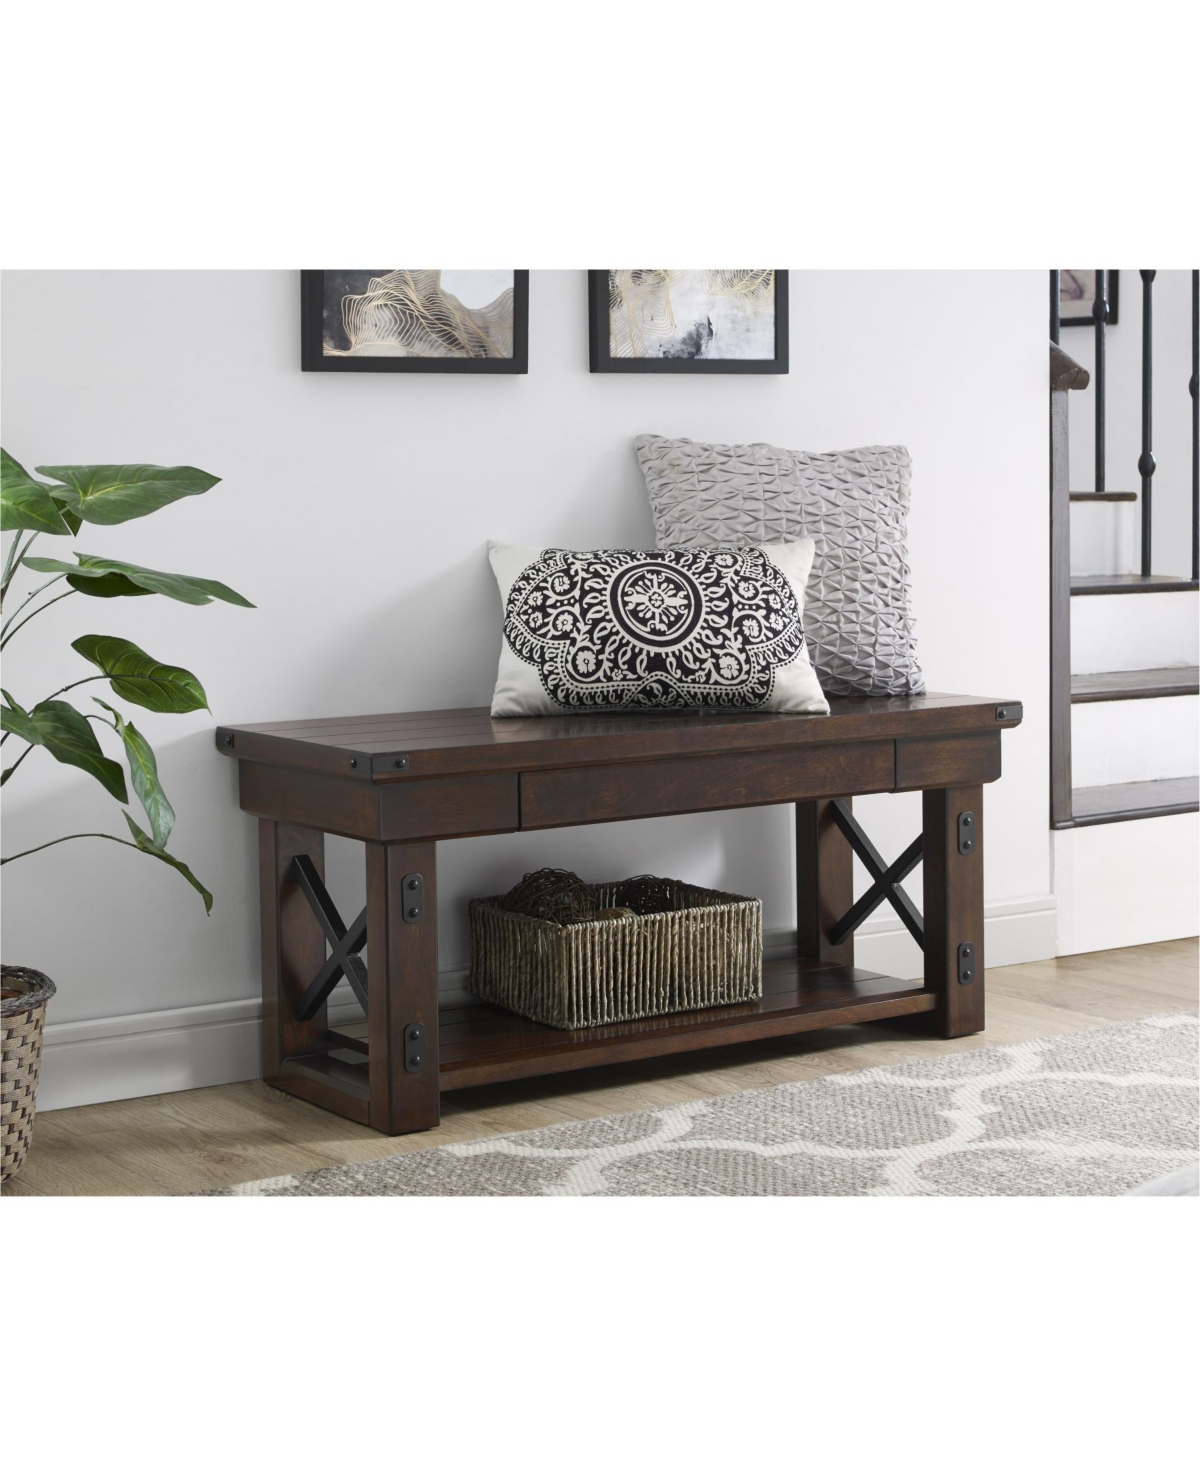 Ameriwood Home Broadmore Entryway Bench